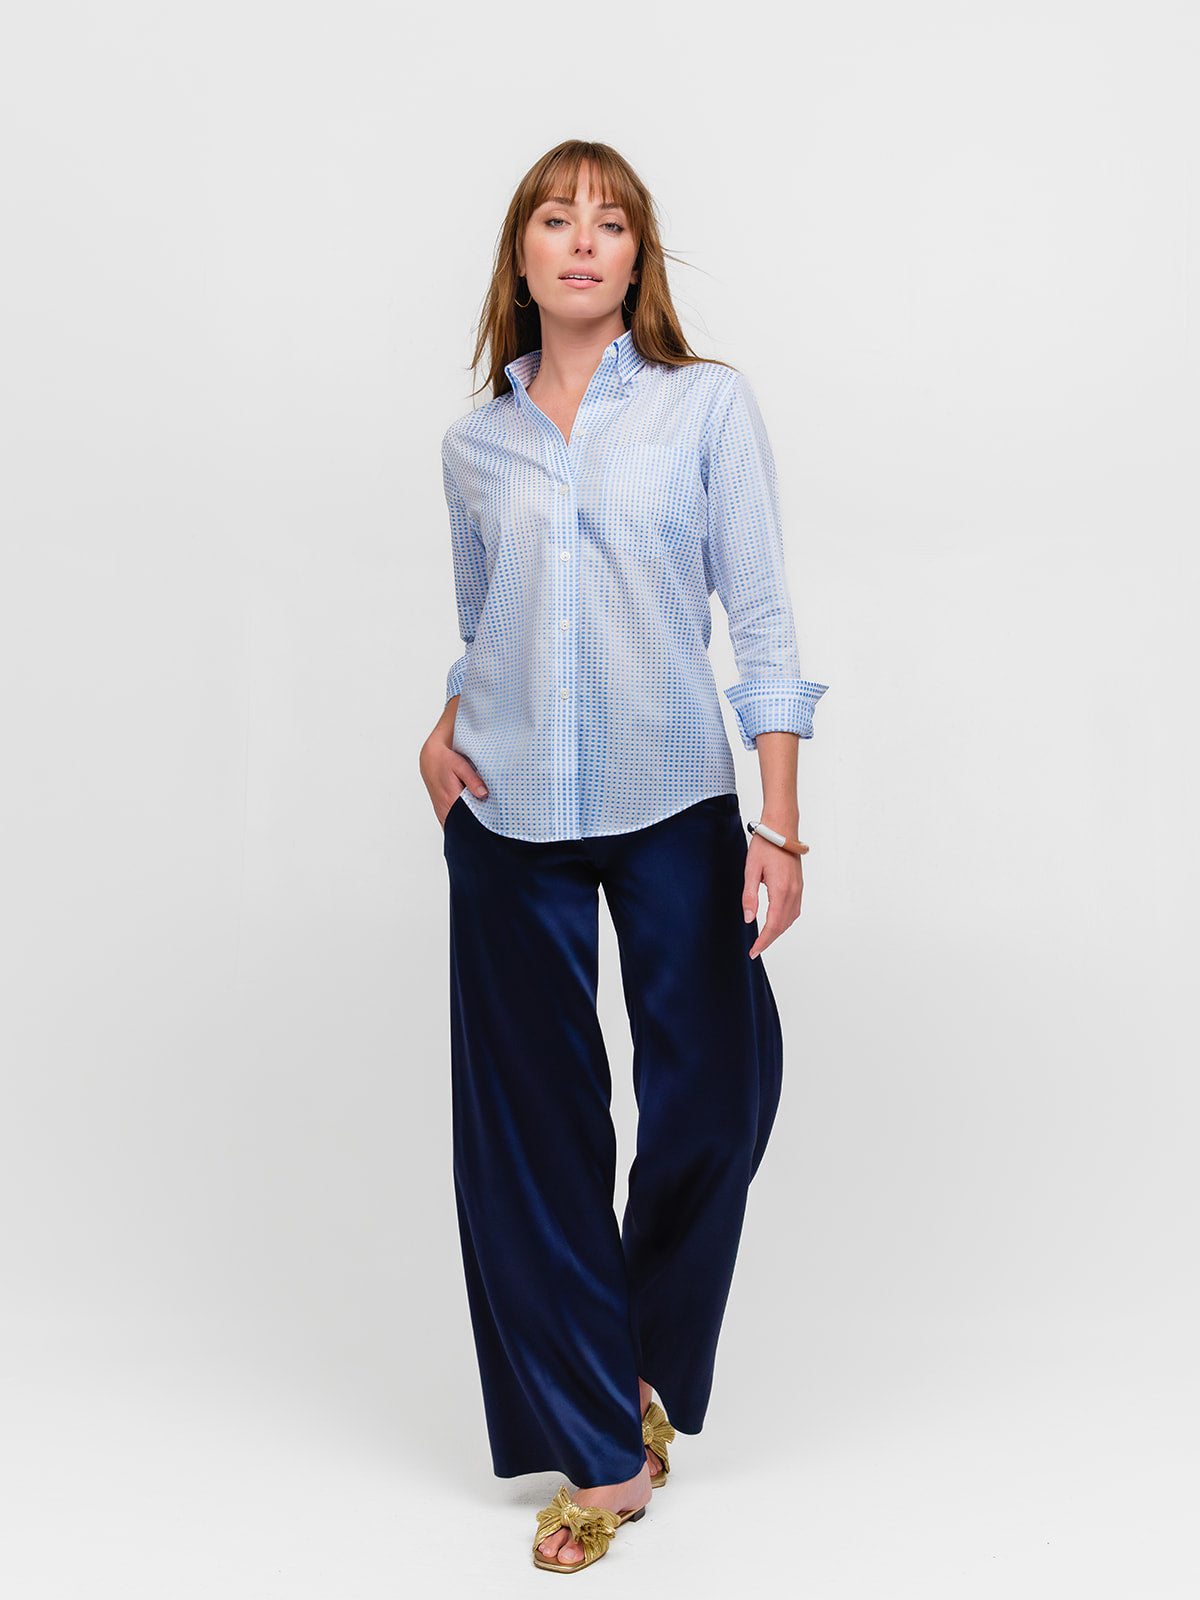 Woman posing while wearing a pale blue polka dot designer button down shirt for women made of fine Italian cotton